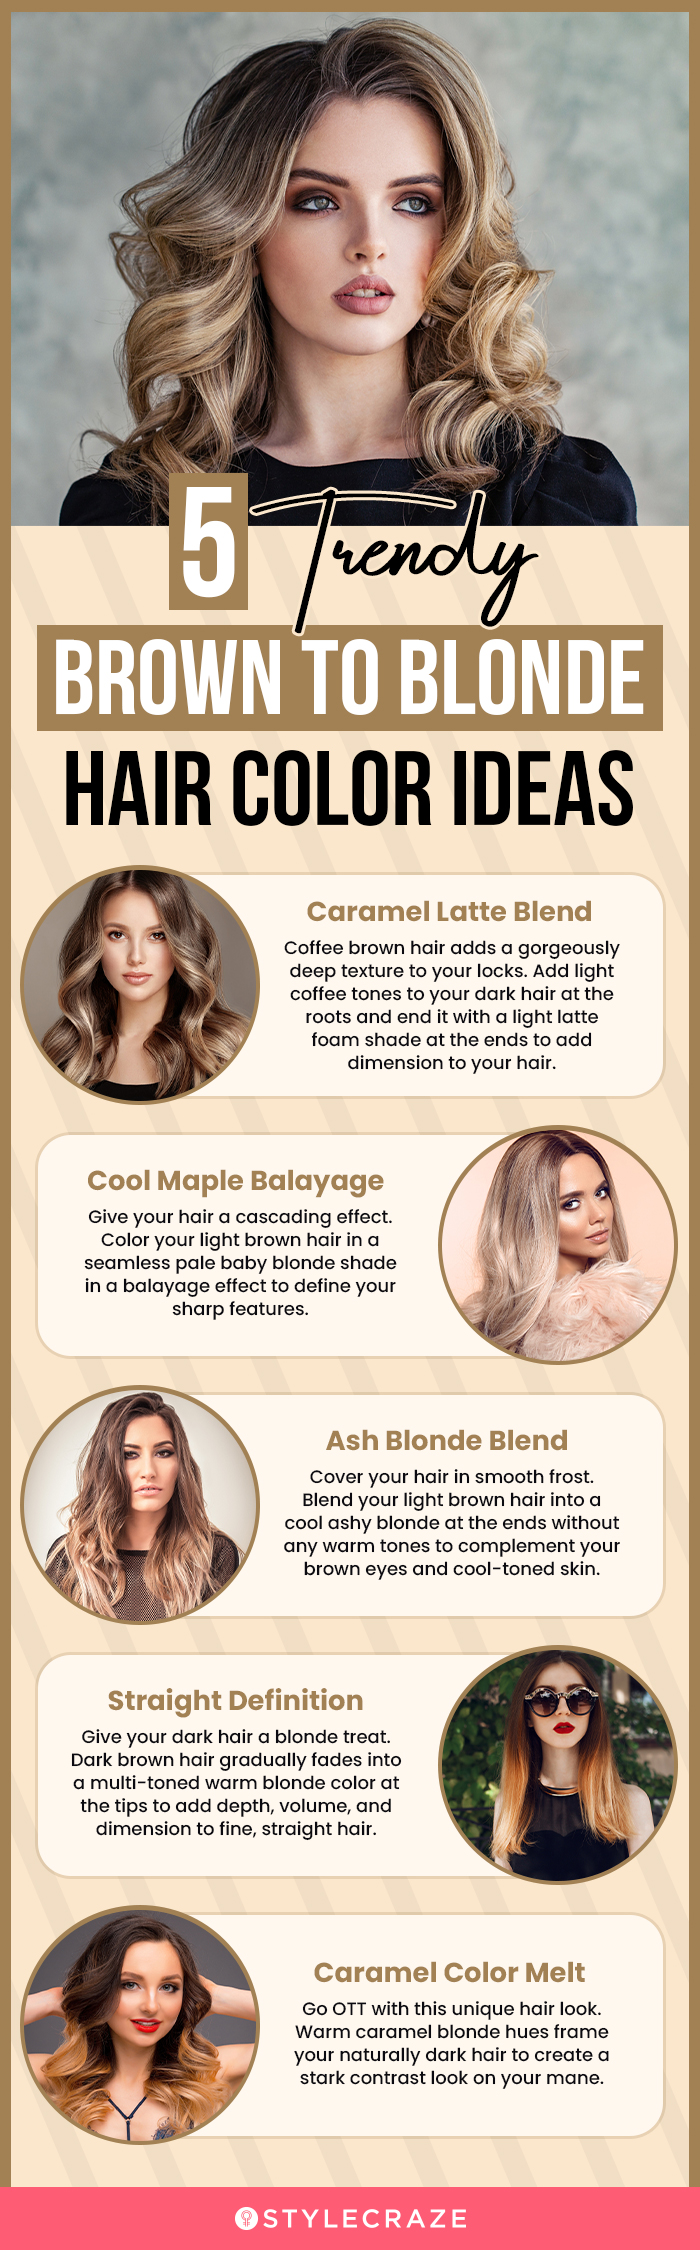 Tips for Blonding Textured Hair, According to a Color Expert